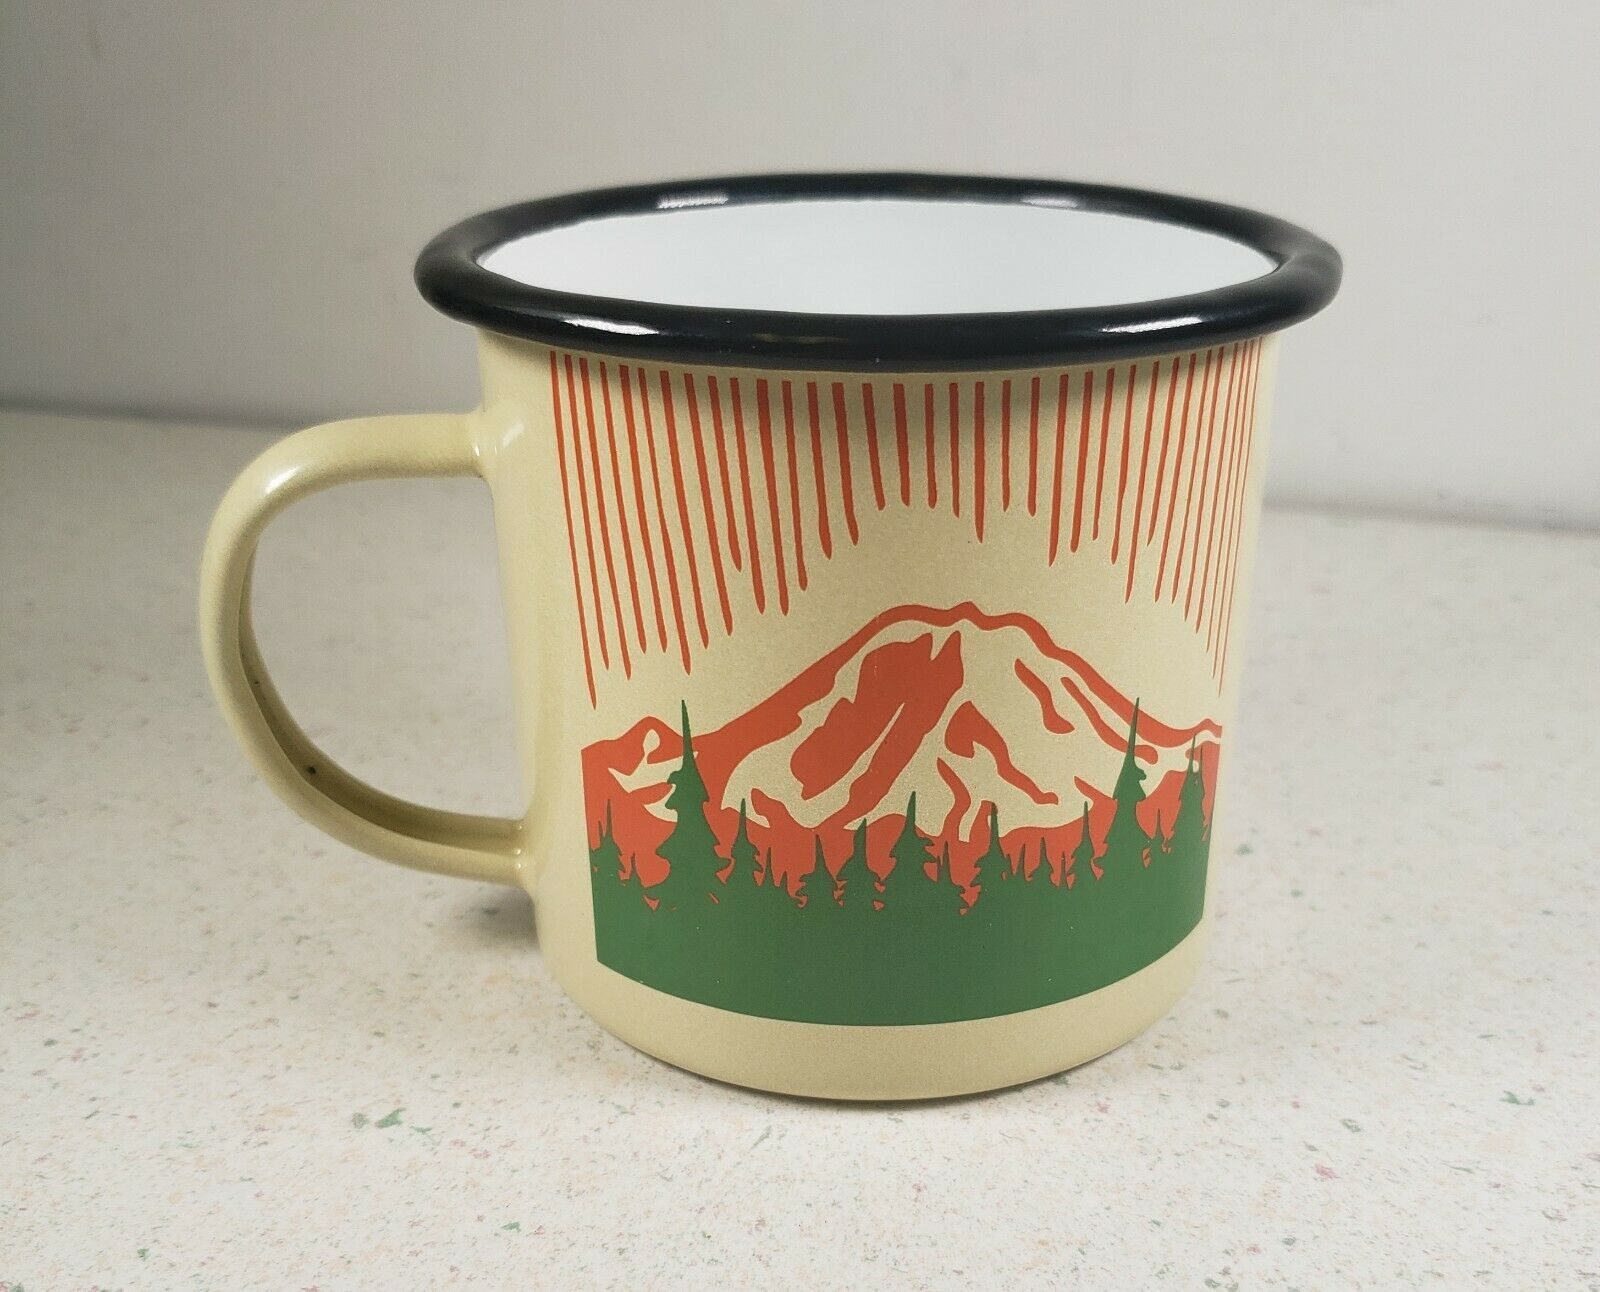 Camping Tan 17 Ounce Enameled Finish Carbon Steel Campsite Coffee Mug W/ Handle - $16.16